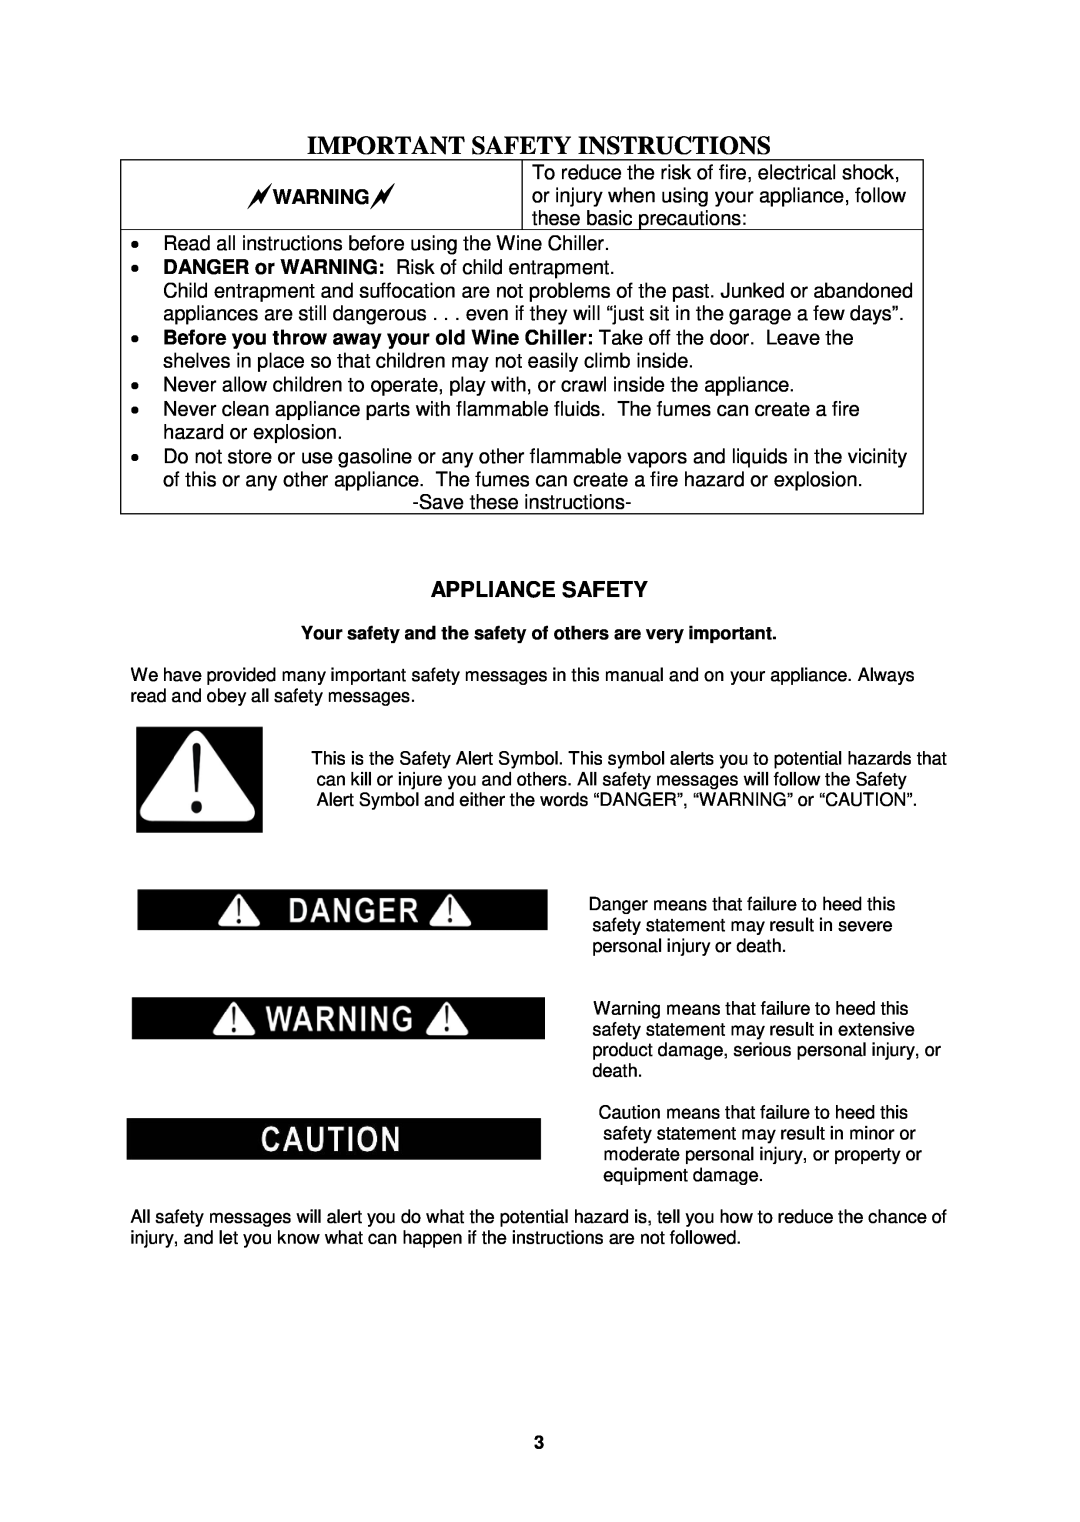 Avanti WCR506SS instruction manual Appliance Safety, Warning, Important Safety Instructions 